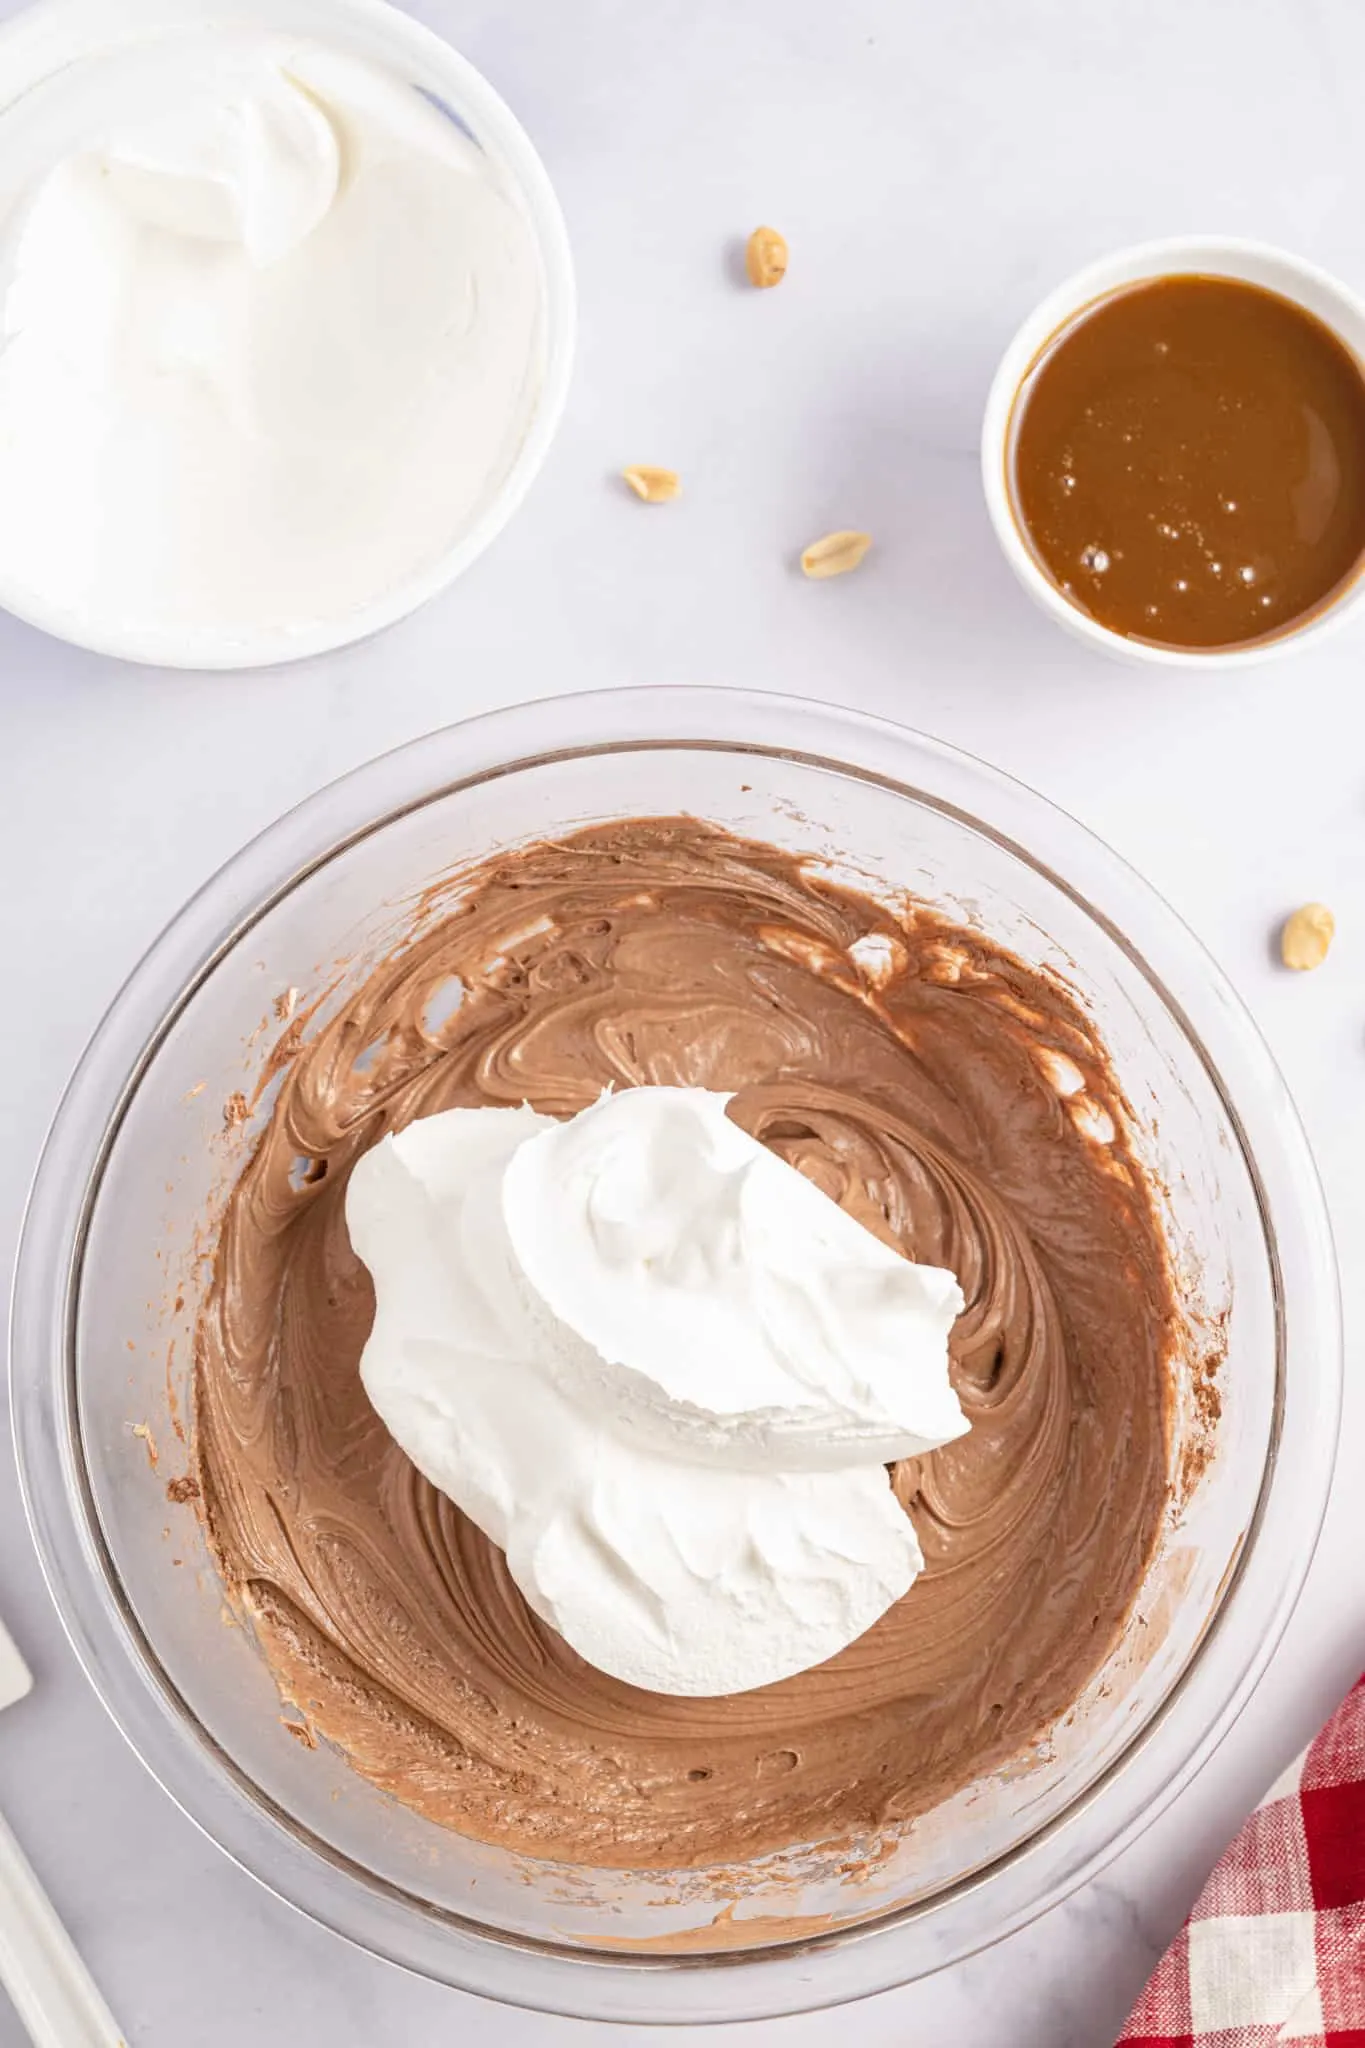 Cool Whip on top of chocolate cream cheese and sugar mixture in a mixing bowl